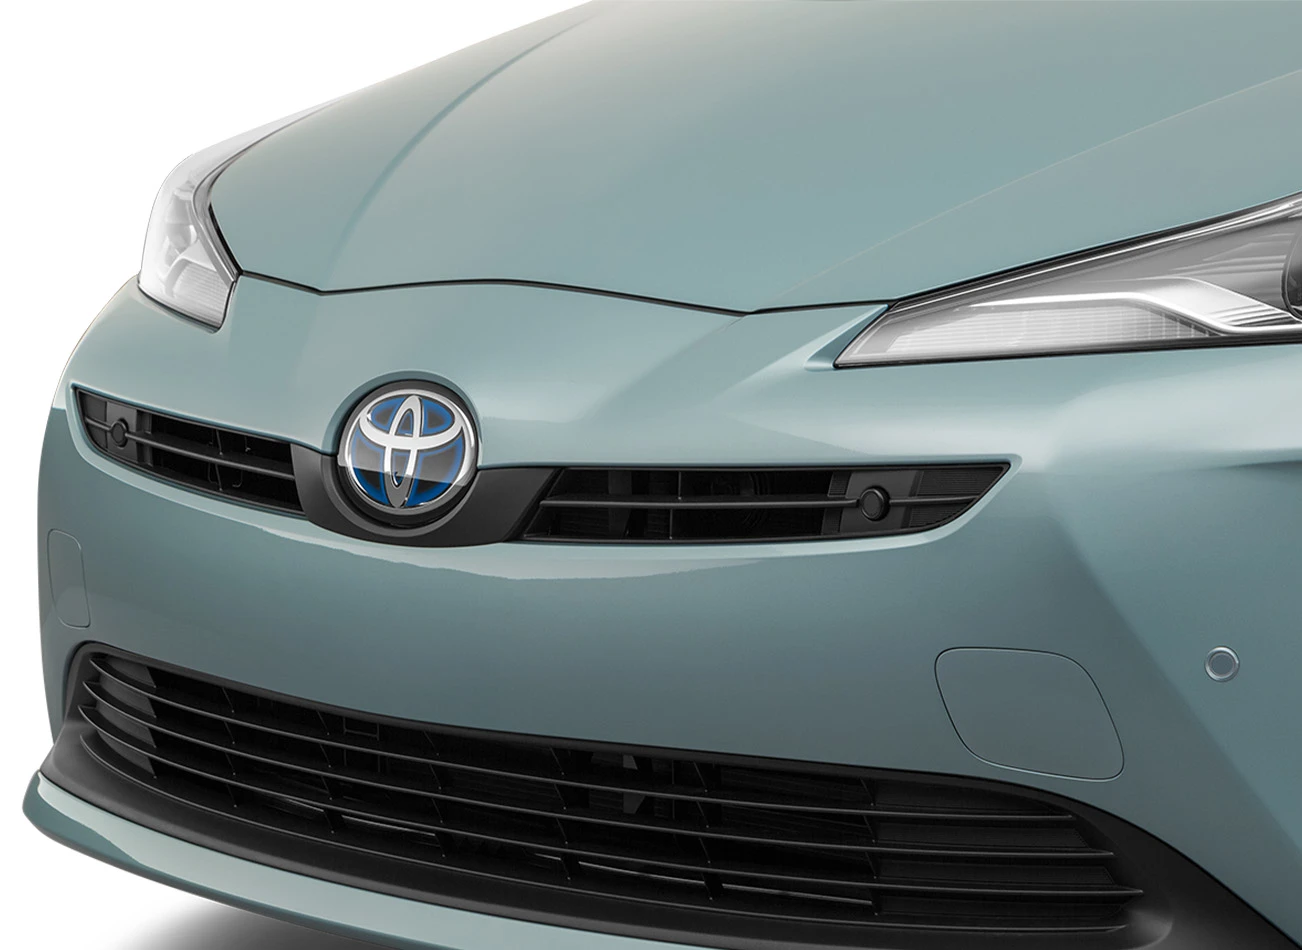 2020 Toyota Prius: Front grill and LED headlights | CarMax